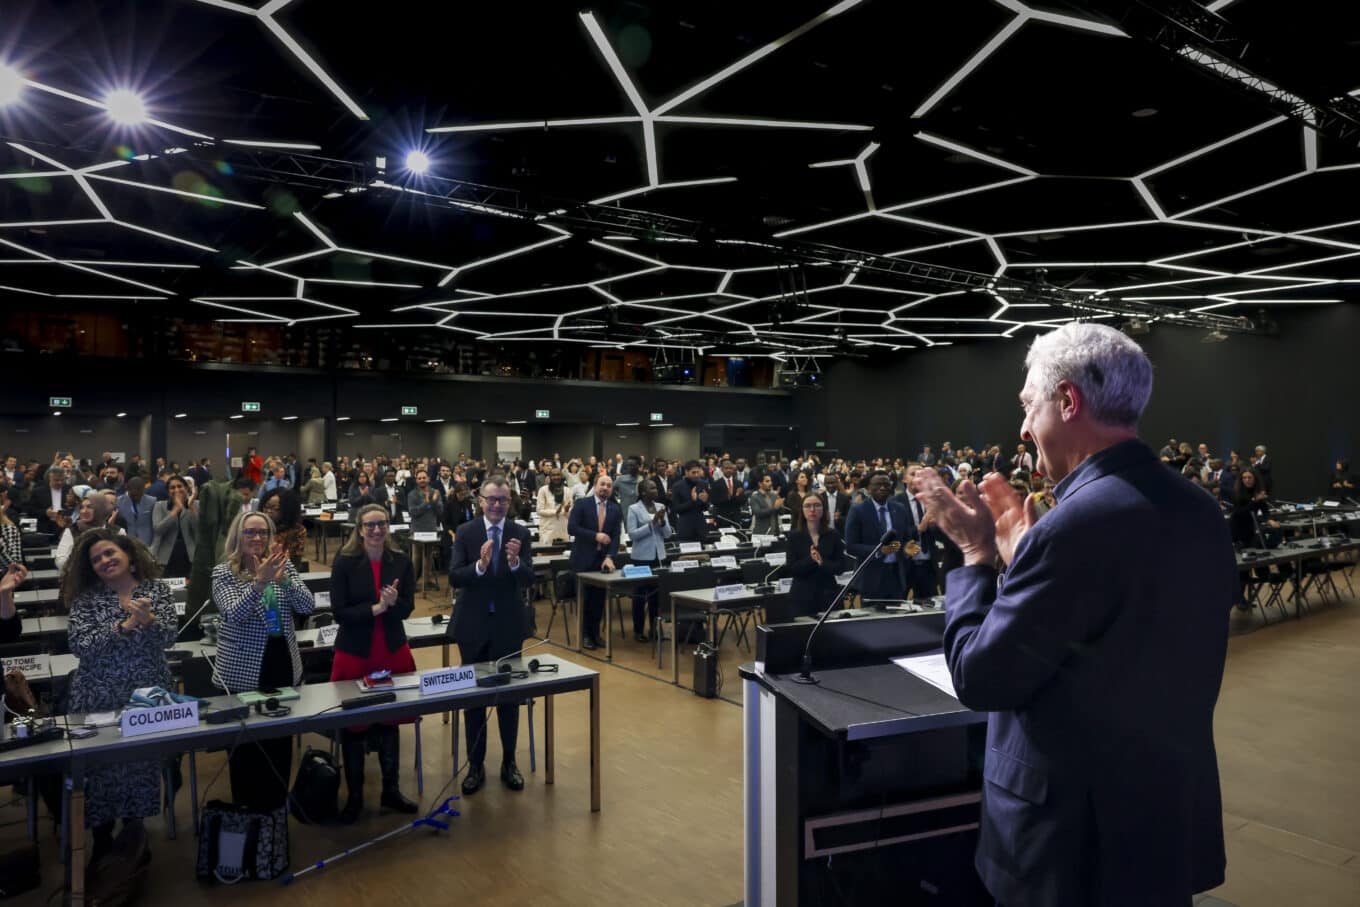 UN High Commissioner for Refugees Filippo Grandi stands in front of a podium, clapping, in a room with a black geographic cieling an audience of world leaders. 